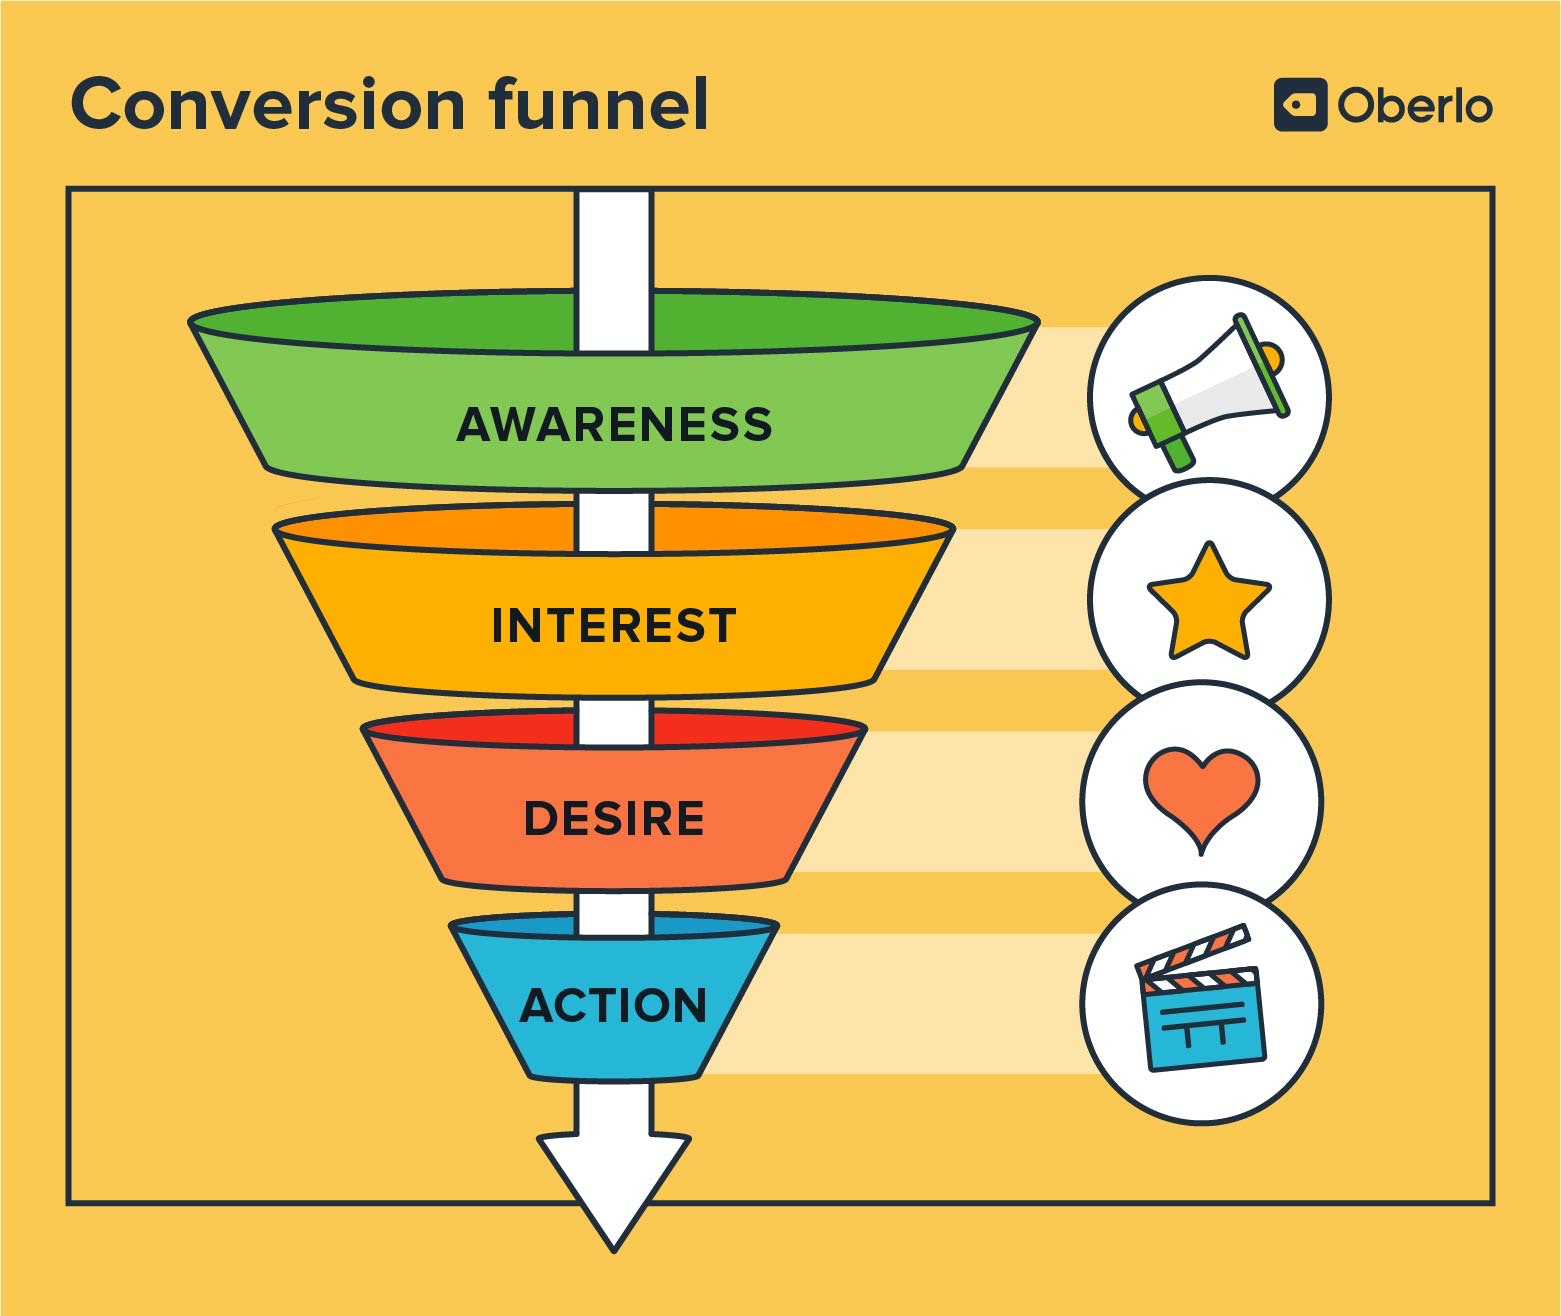 How to Optimize your Conversion Funnel